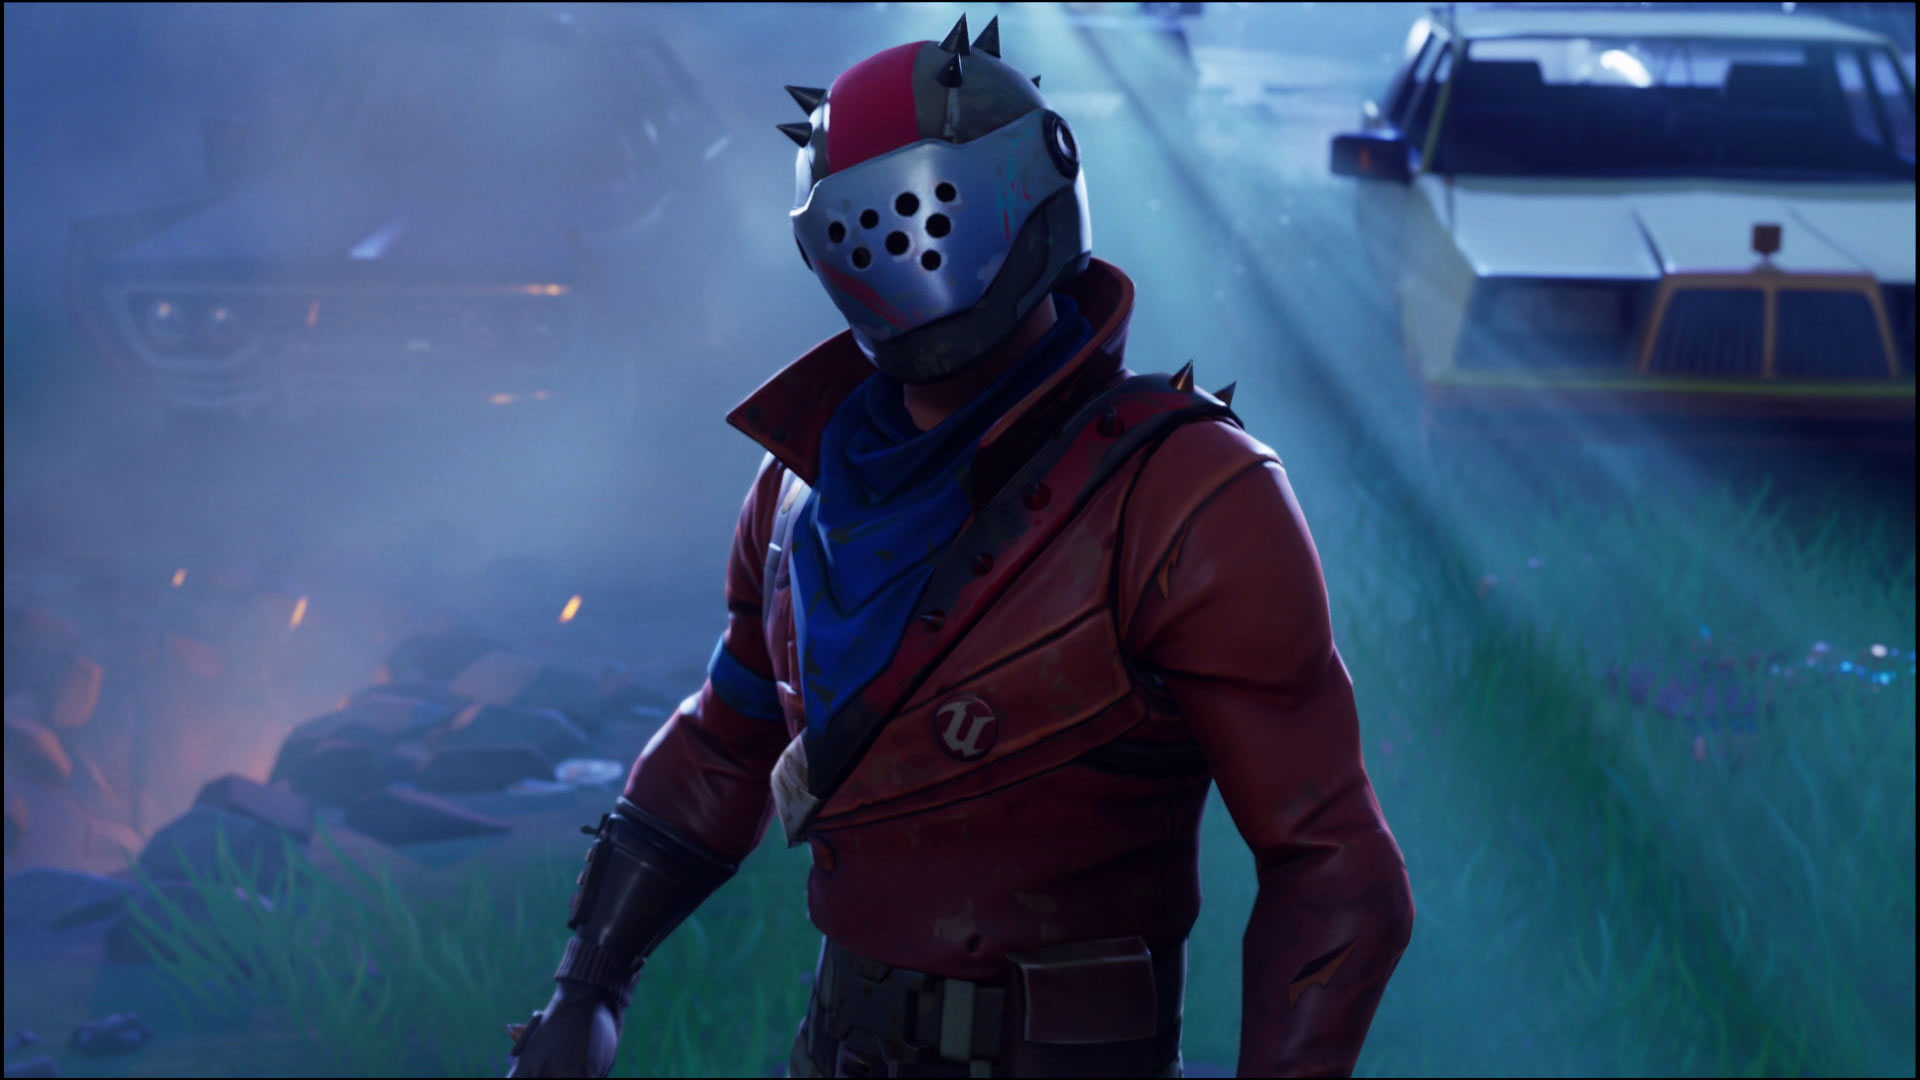 Fortnite wallpaper, Xbox One, video games, real people, one person, clothing